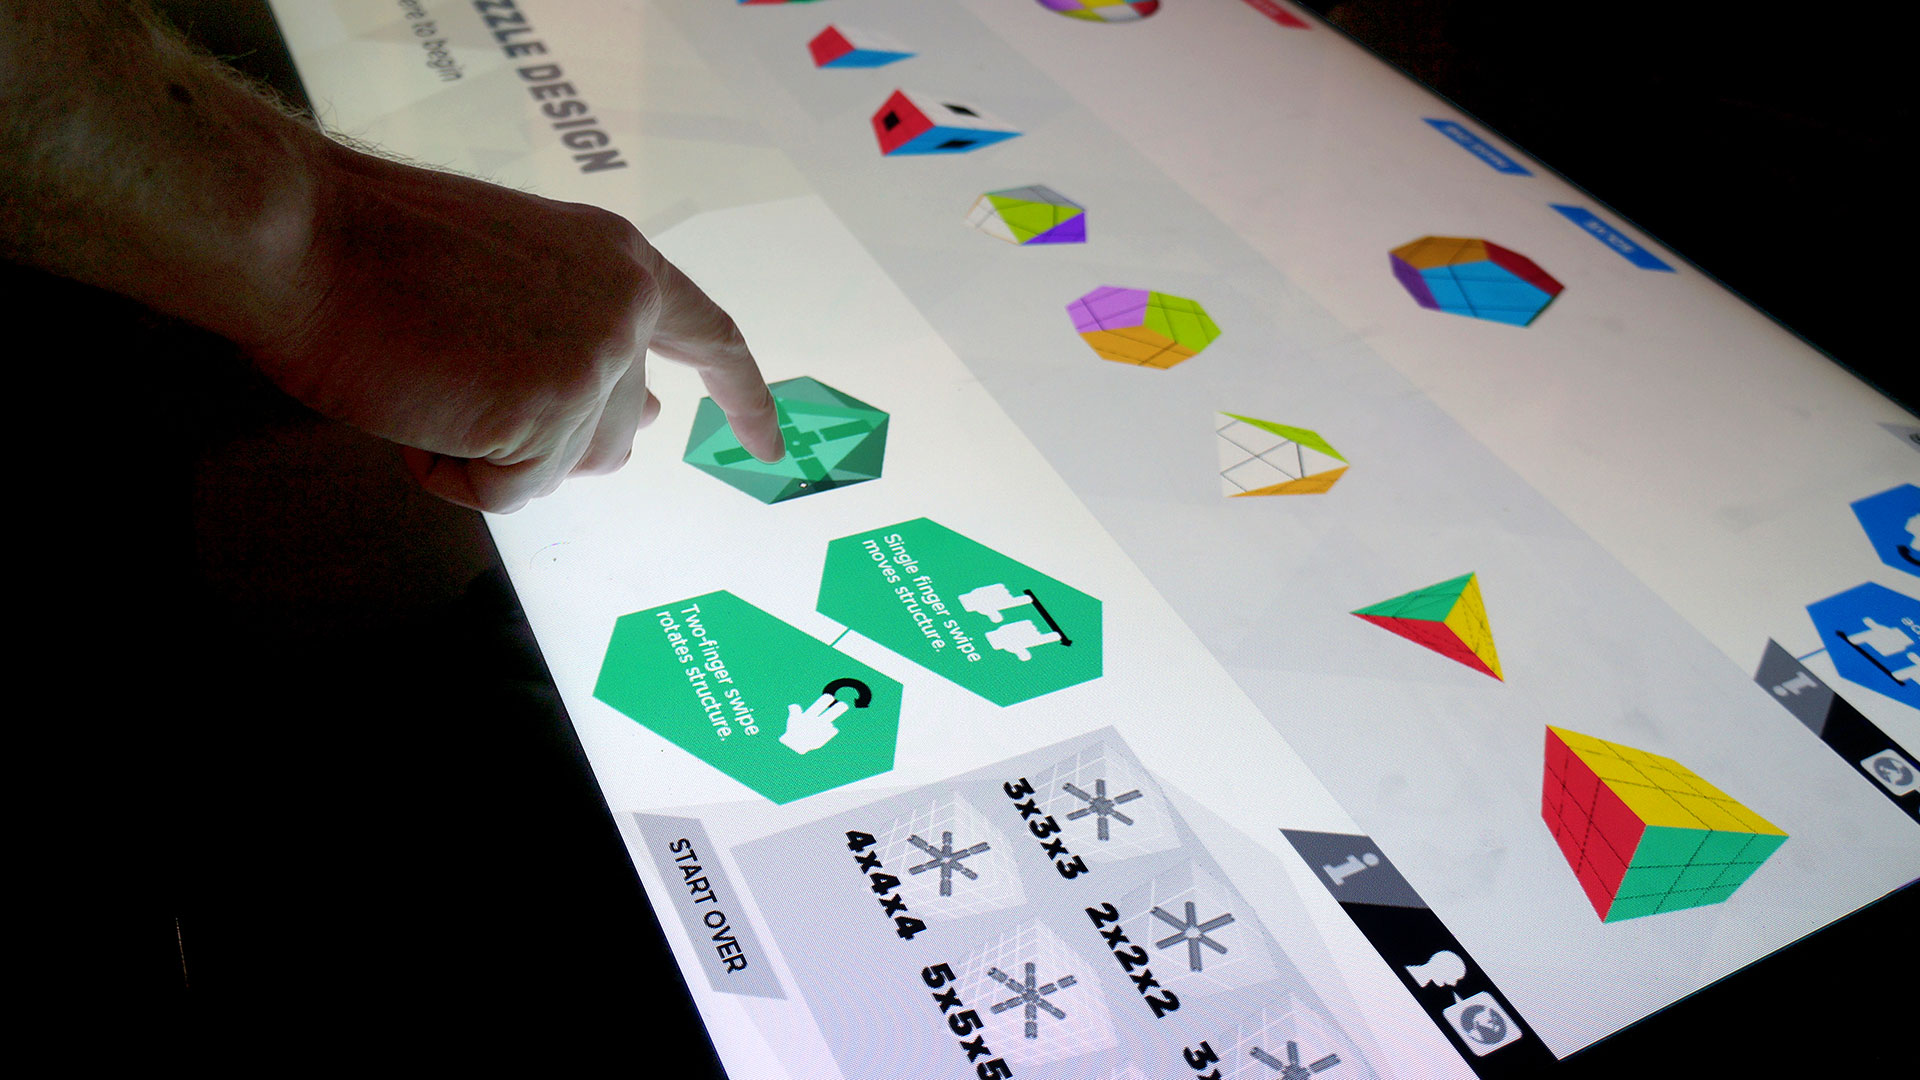 The final Twisty Puzzle interface presents color-coded user stations on a large touch table display.